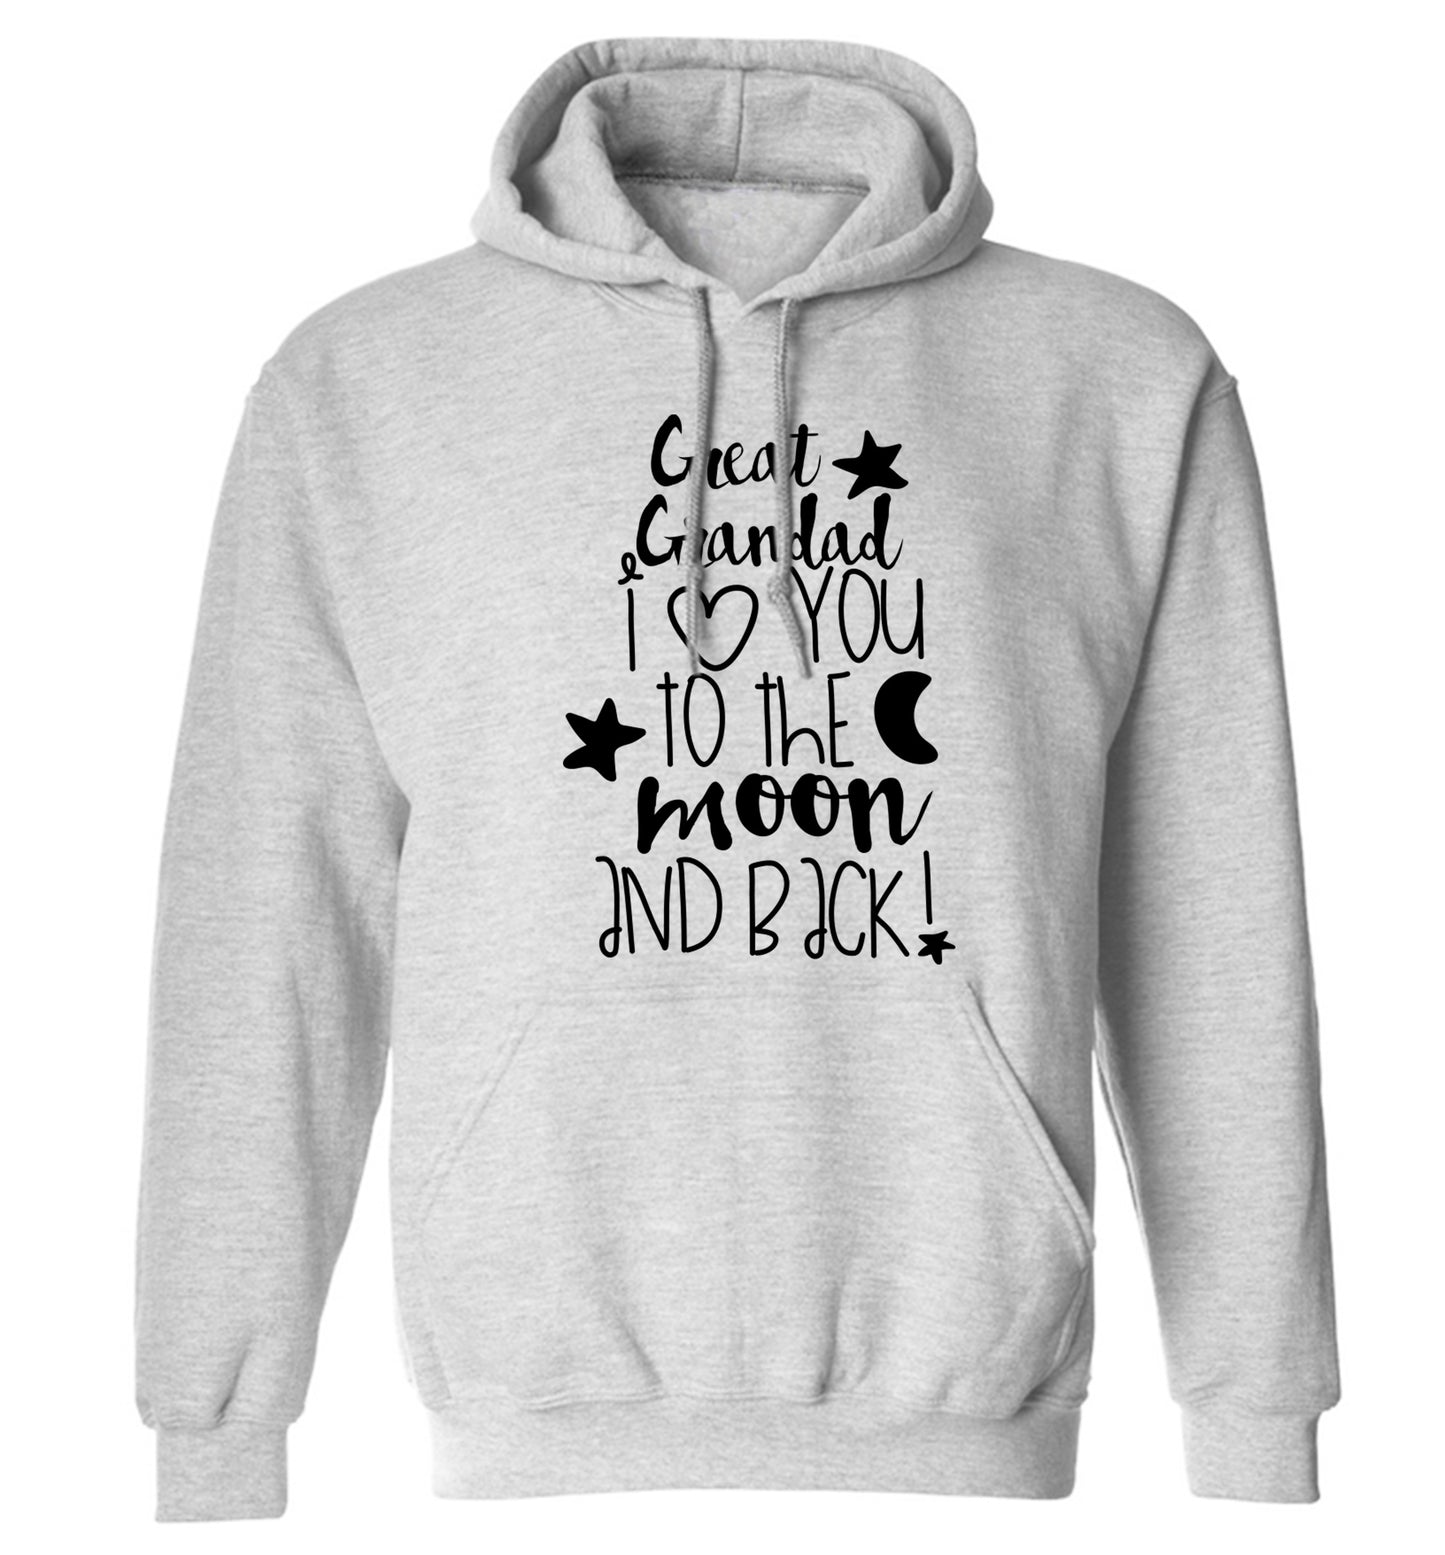 Great Grandad I love you to the moon and back adults unisex grey hoodie 2XL